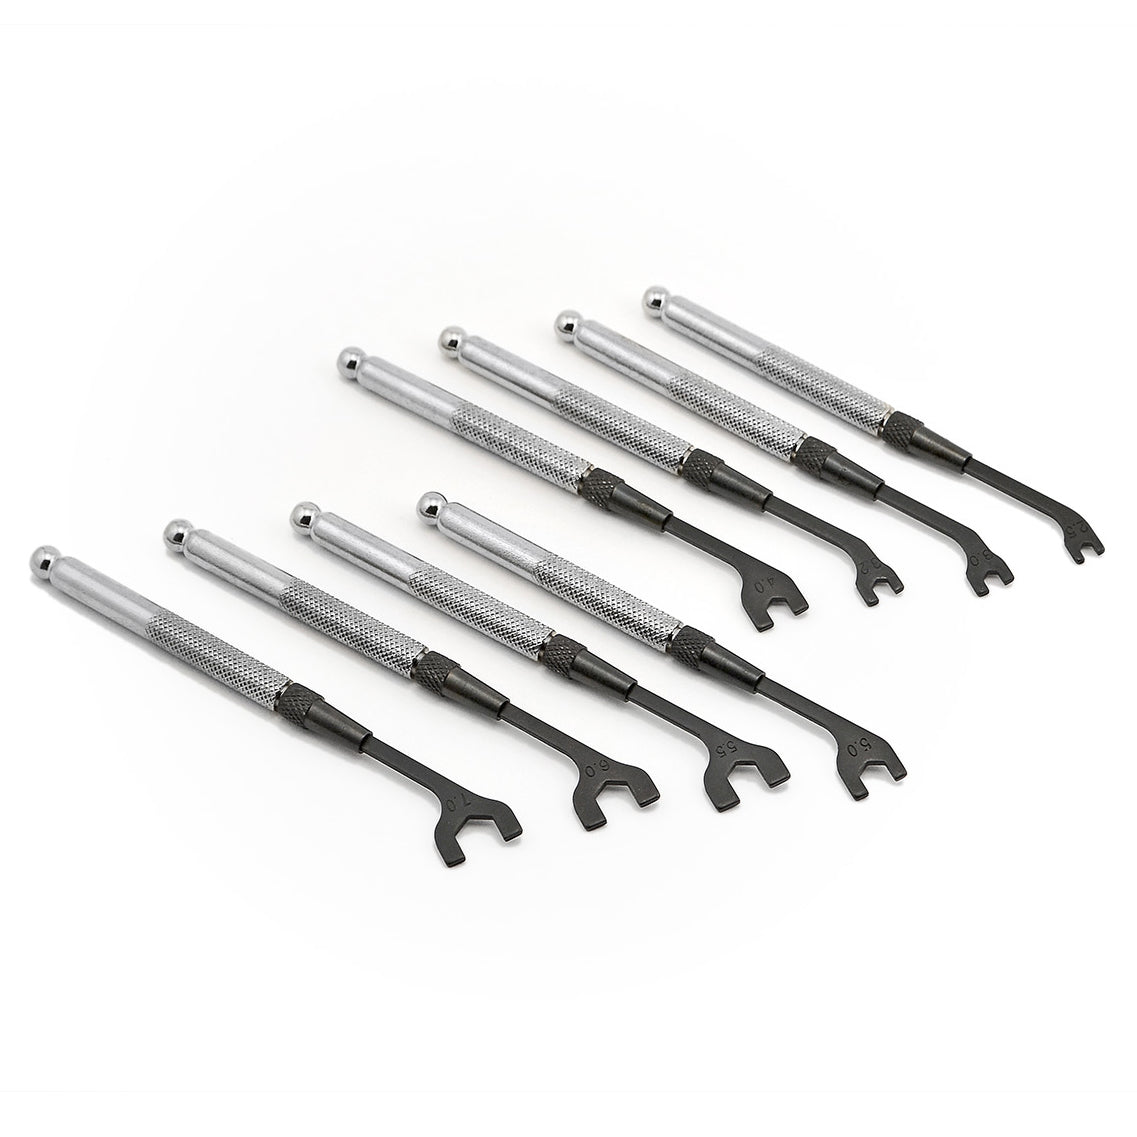 8-piece Open Ended Wrench Metric Set